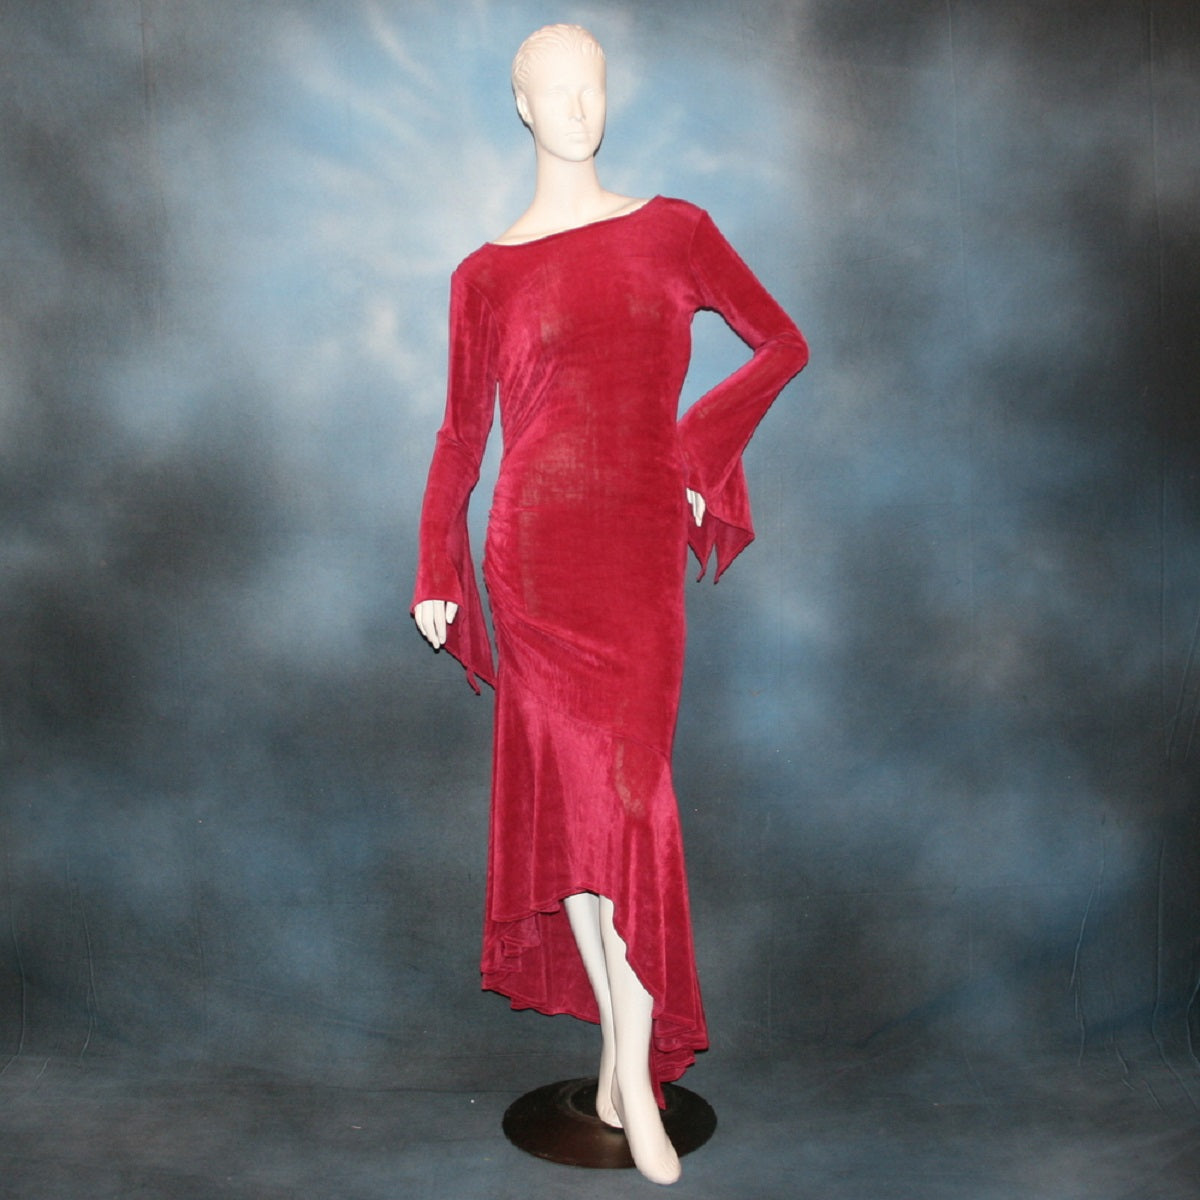 Deep rose Latin/rhythm/social dress created of luxurious deep rose slinky features ruching up the right side & long sleeves with an open flared detail.